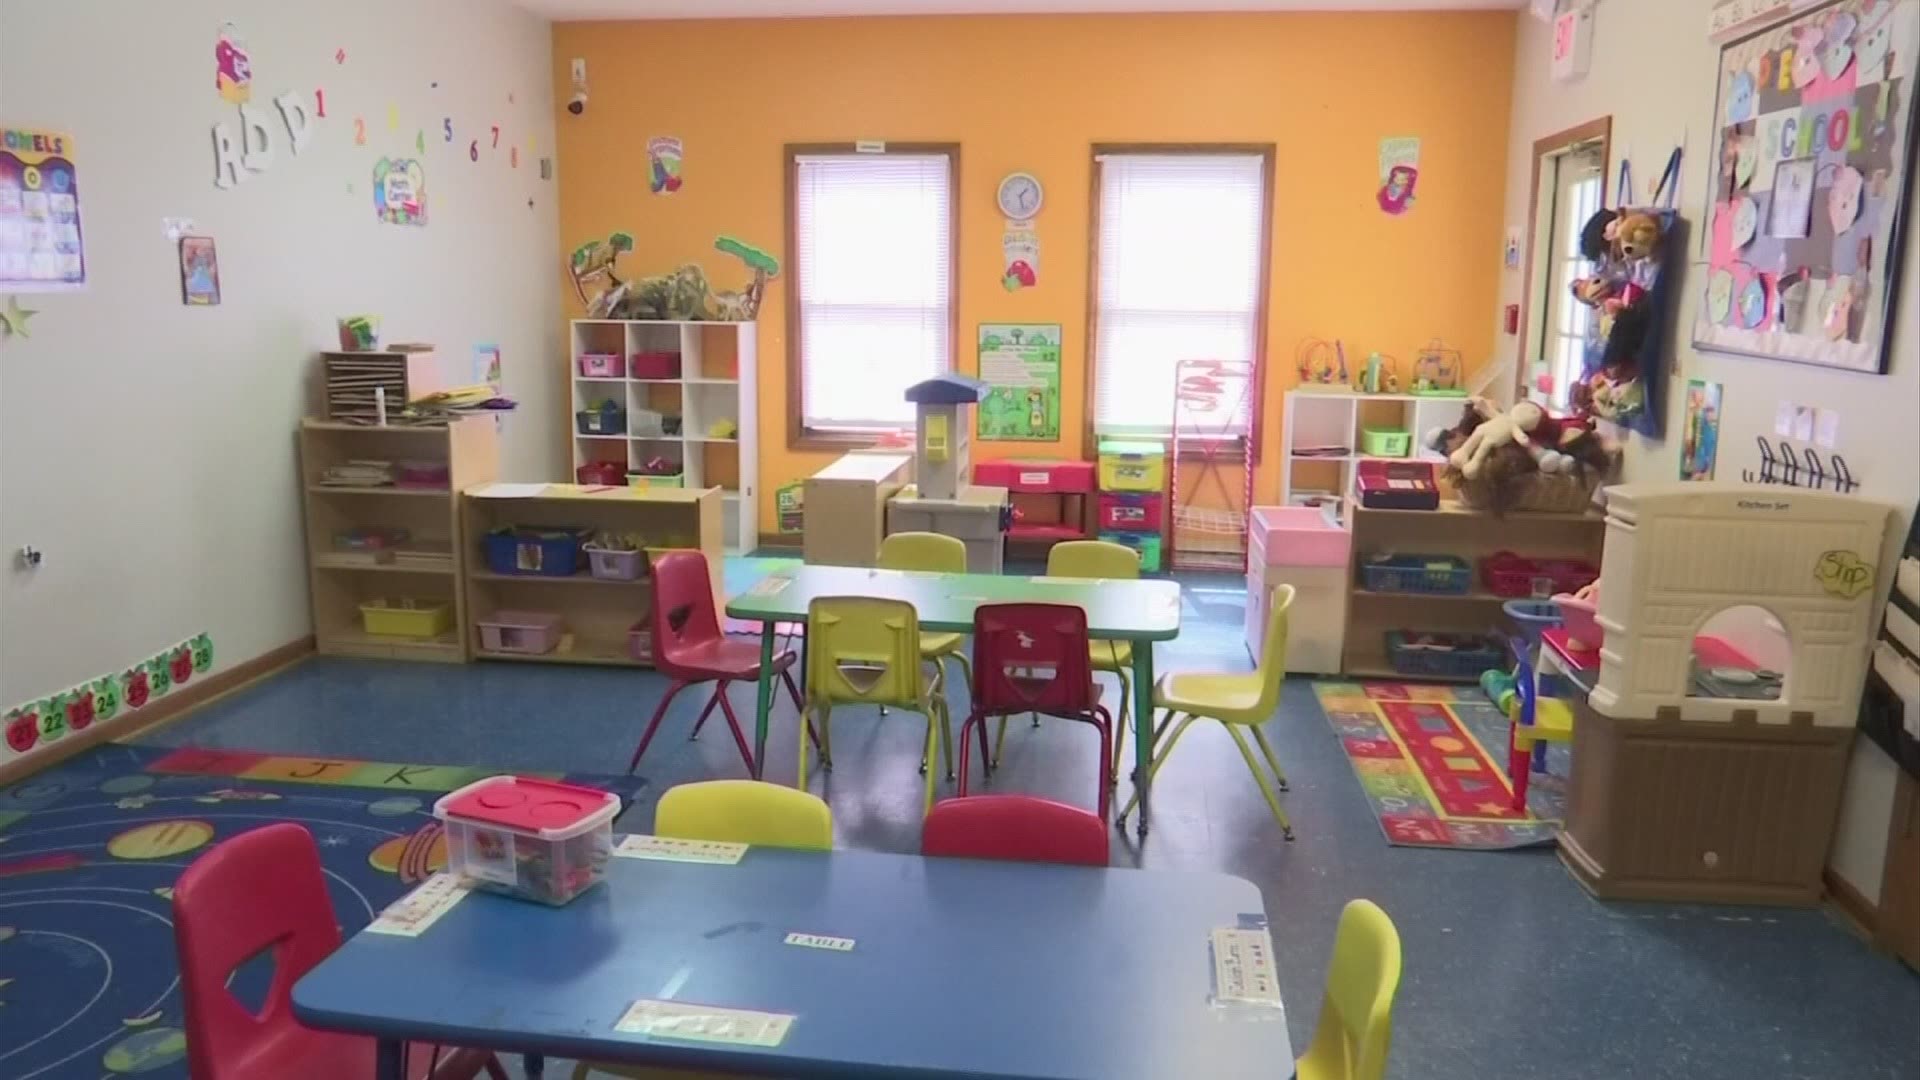 When daycare centers re-opened in June after being closed for months due to the pandemic, they were met with hiring challenges and added expenses.